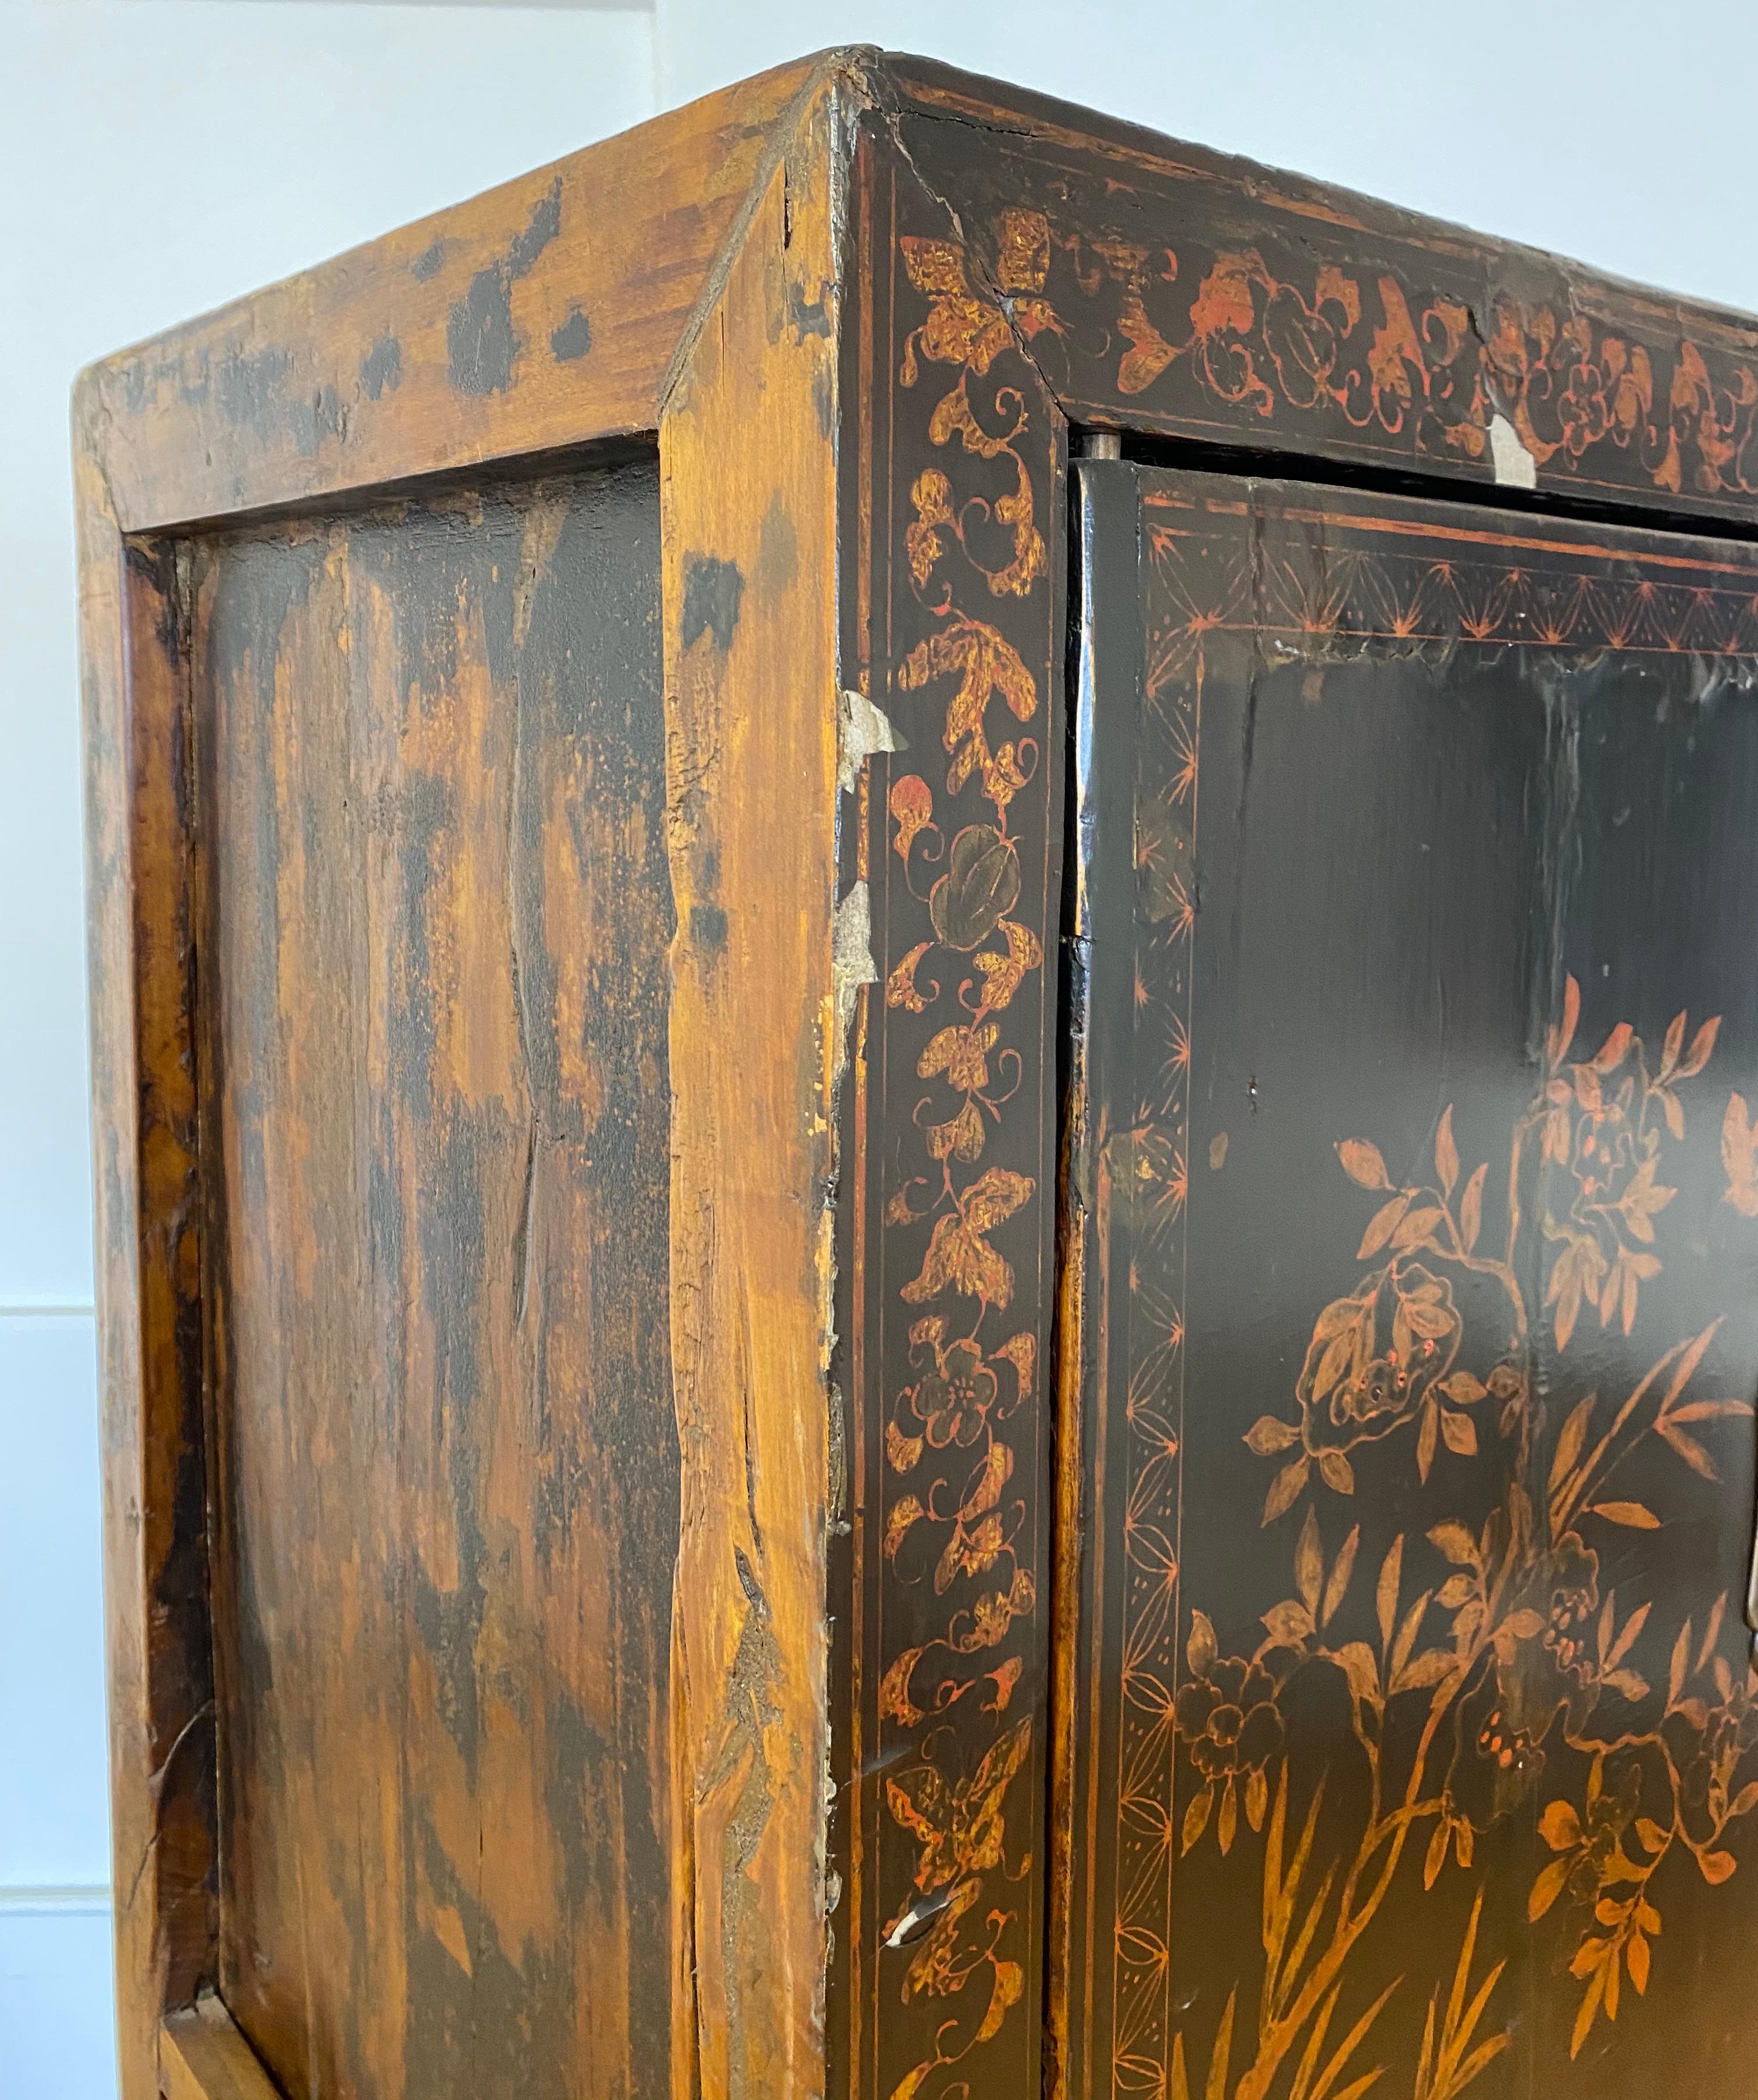 Hand-Painted 19th Century Ebonized Hand Painted Chinese Tansu Cabinet